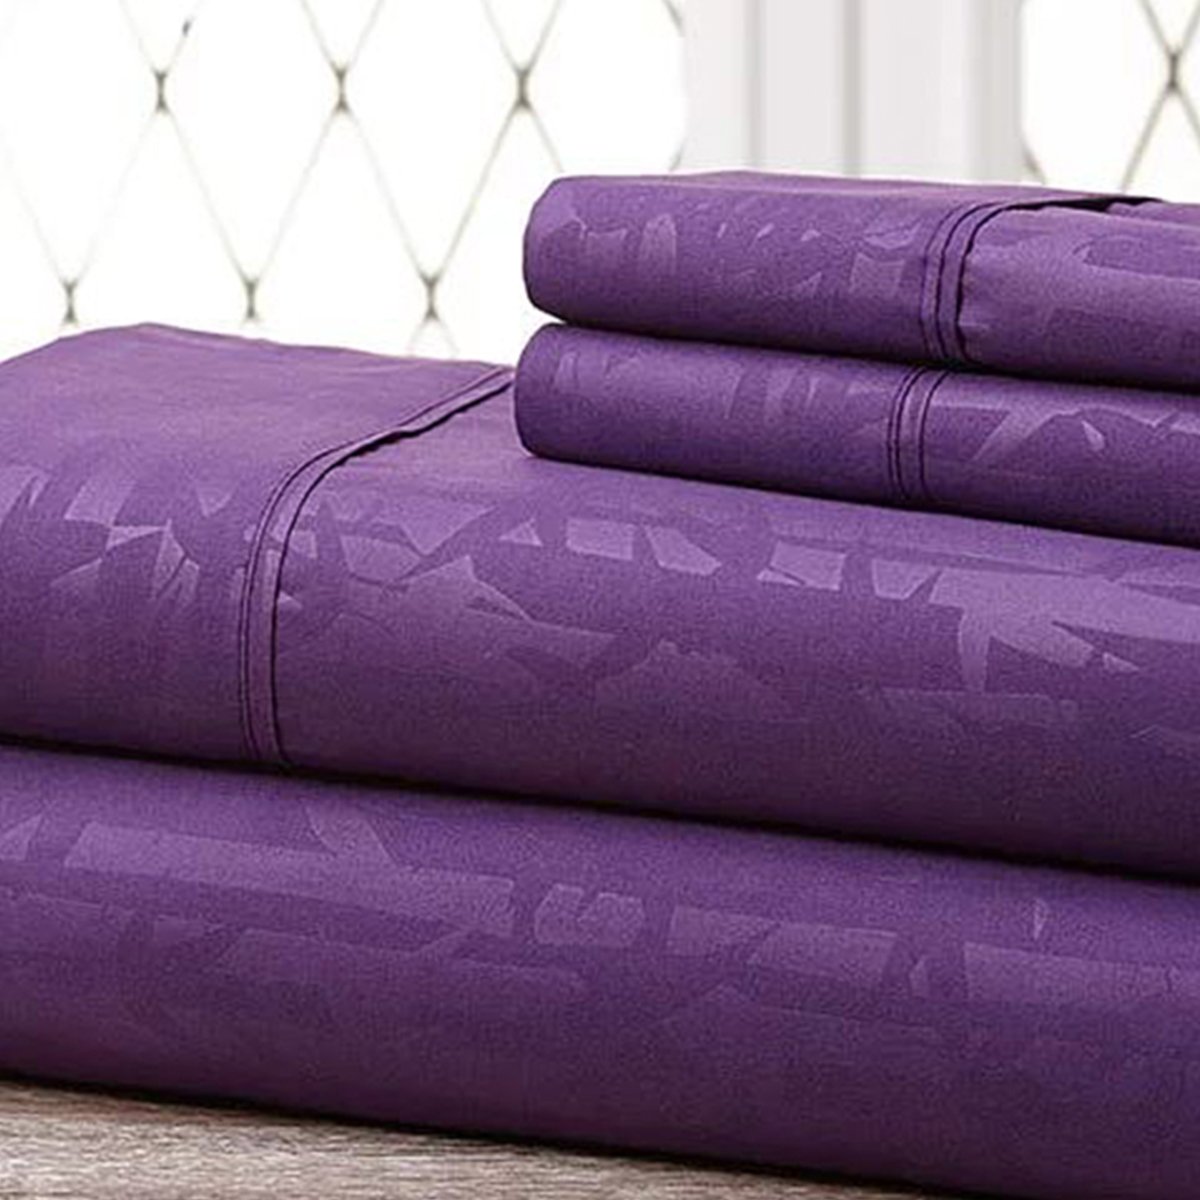 Super-soft 1600 Series Bamboo Embossed Bed Sheet, Purple - Queen, 4 Piece